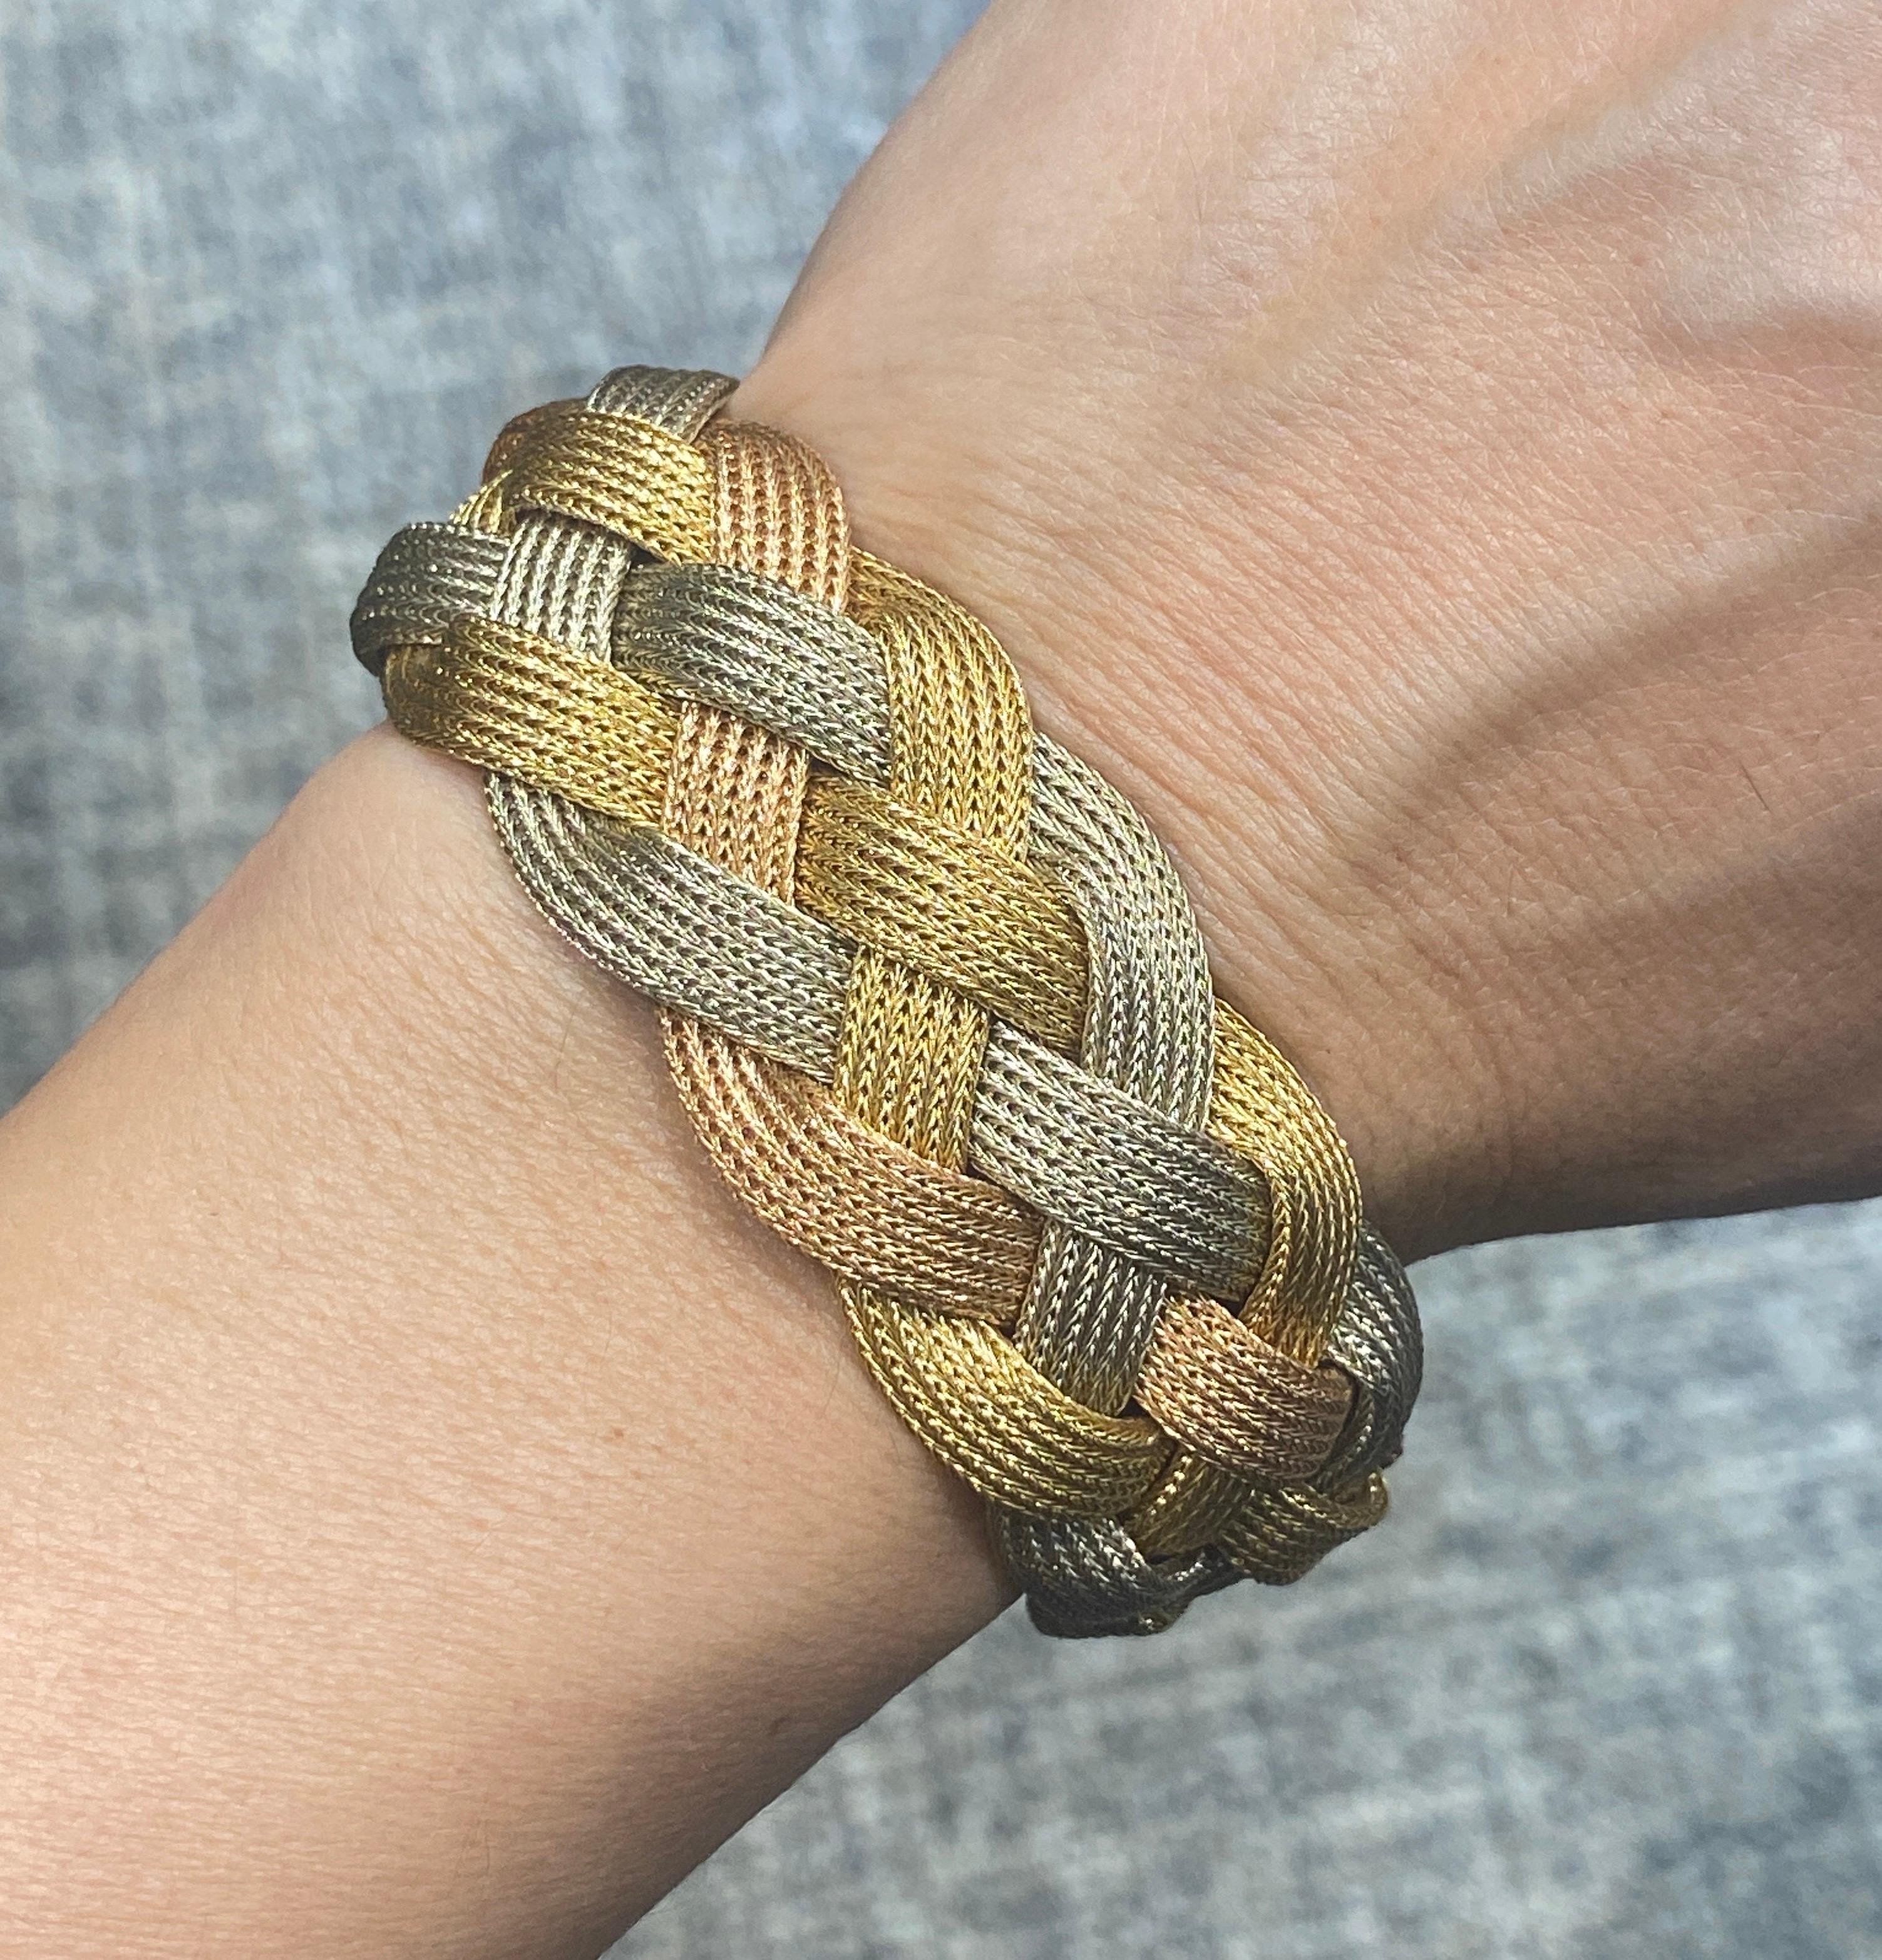 This beautiful 18 carat gold 1960s Italian plaited bracelet is made of white, yellow and rose gold. Although a large piece it is very comfortable to wear and is a stylish addition to any outfit.

The bracelet carries an Italian maker's mark.